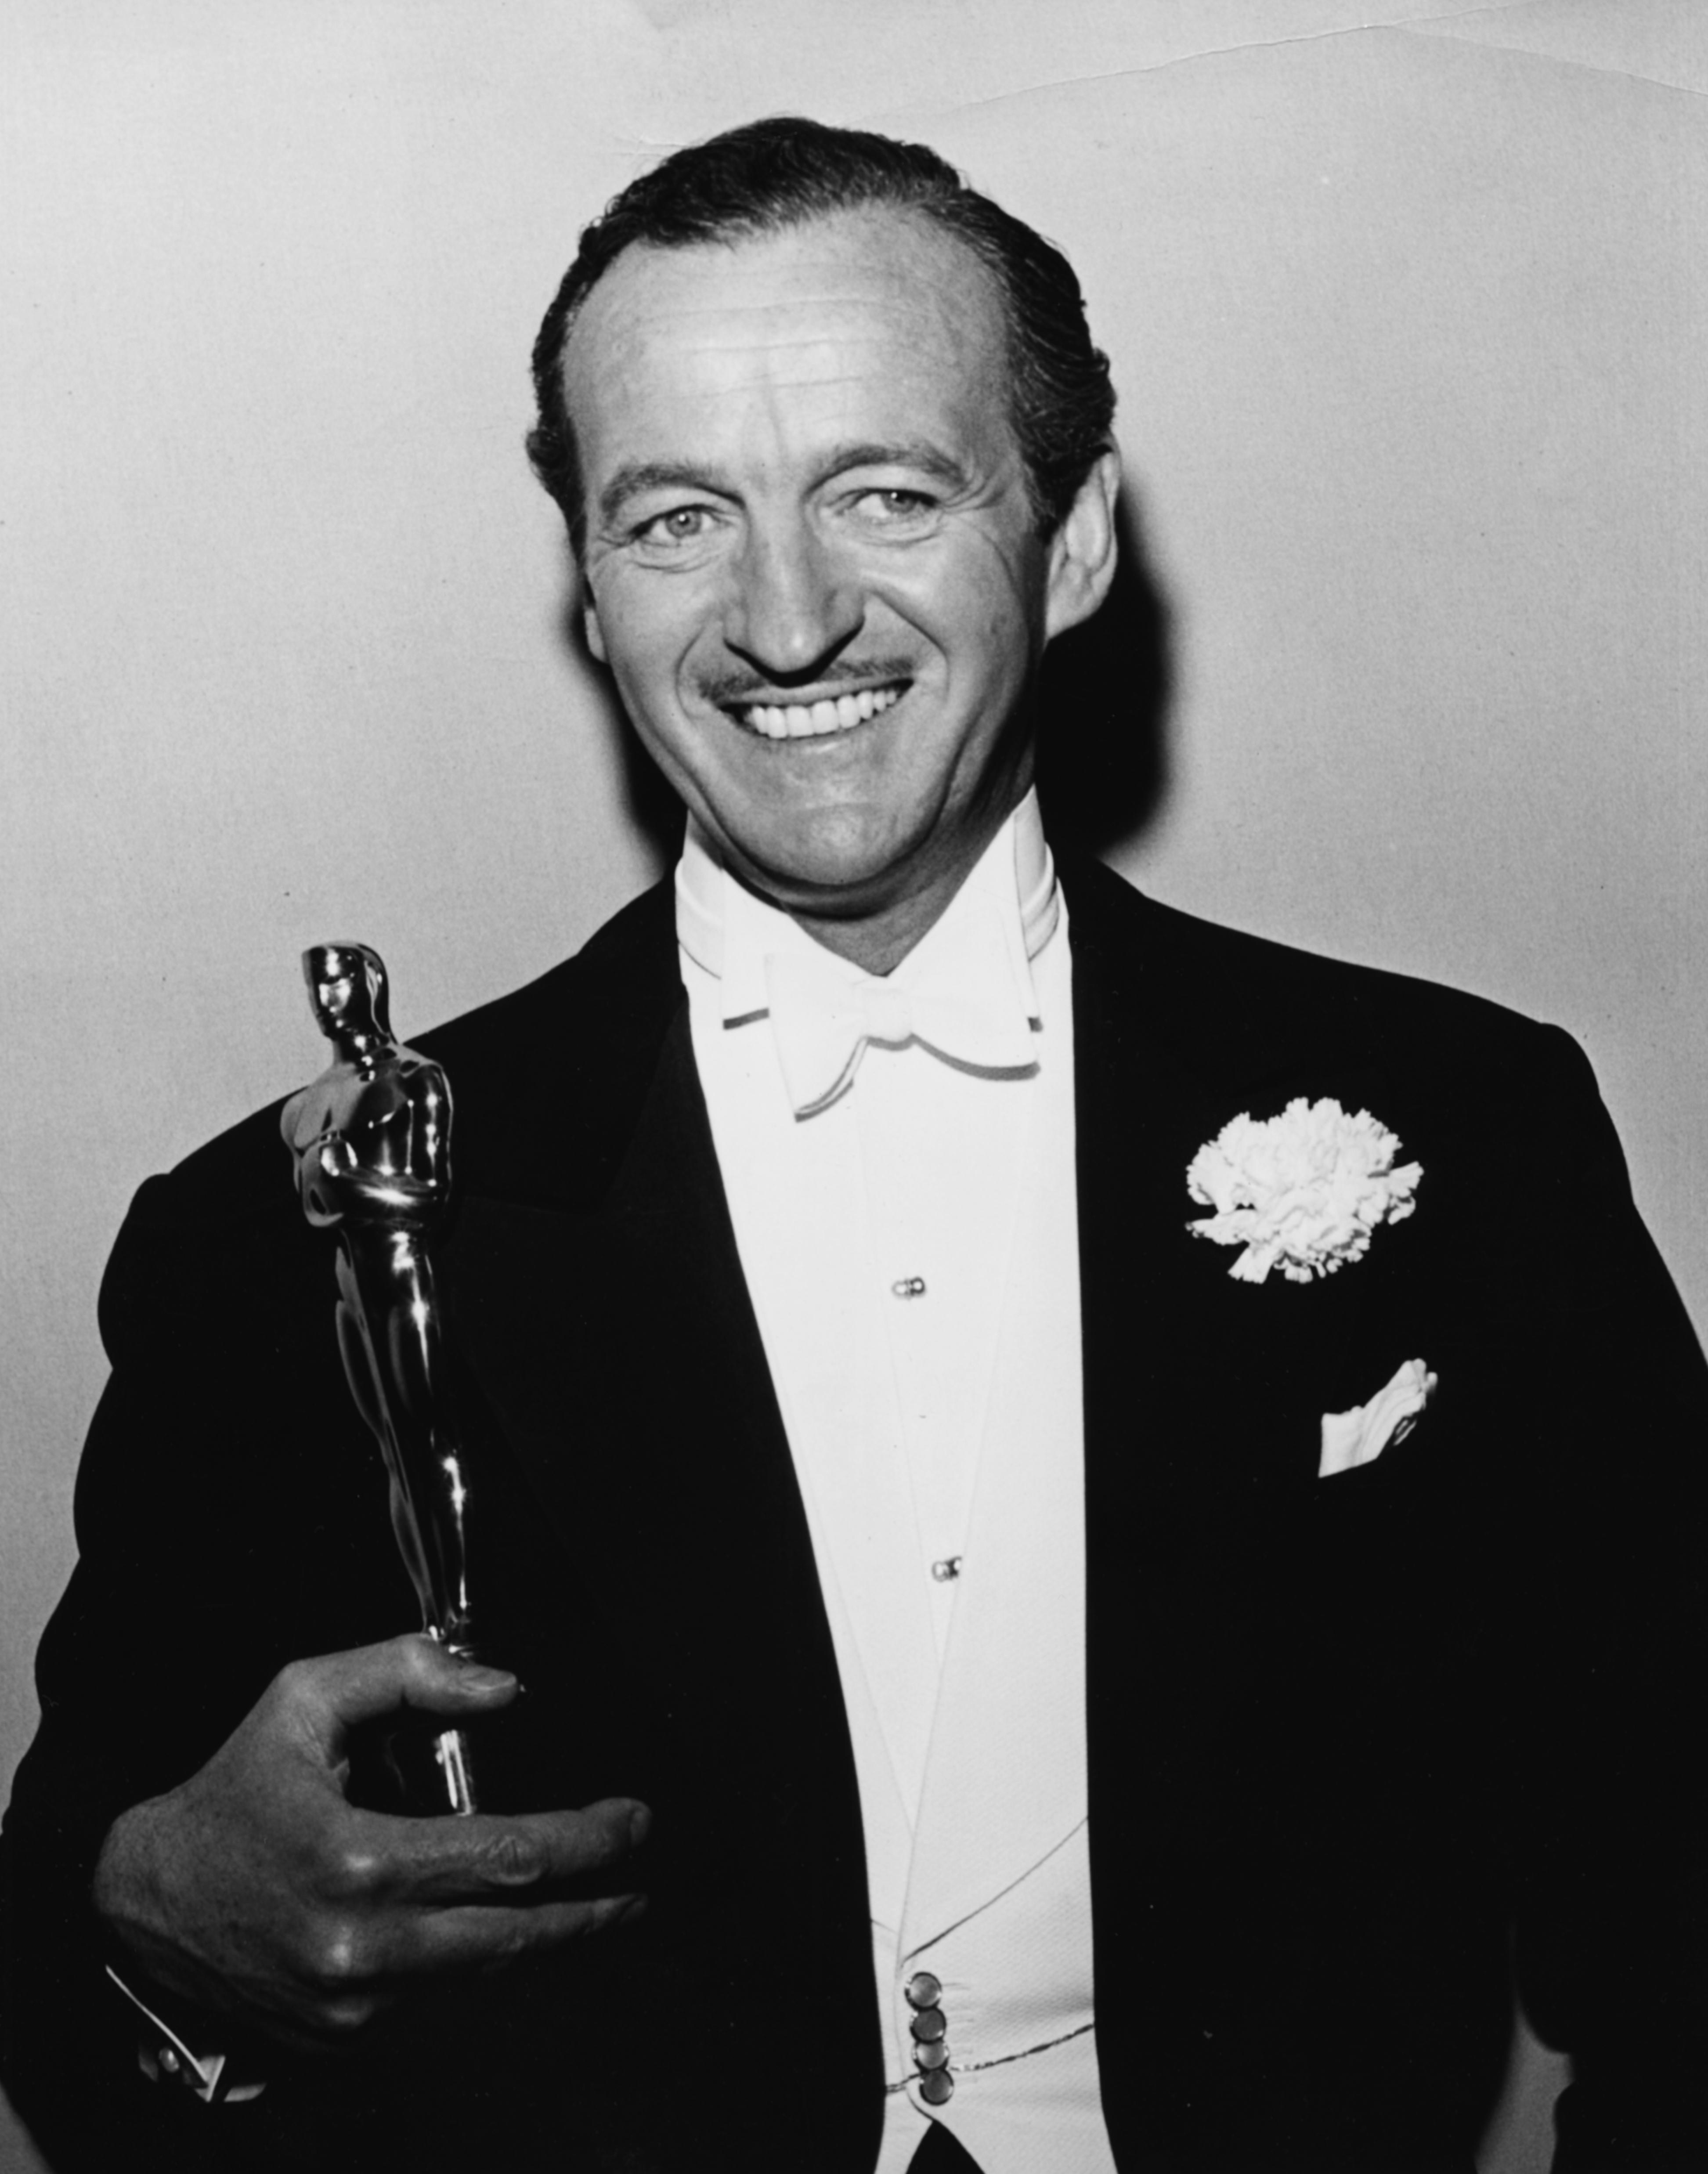 Actor David Niven holding his Best Actor Oscar for the film 'Separate Tables', at the 31st Academy Awards, Los Angeles, April 6th 1959. (Archive Photos—Getty Images)